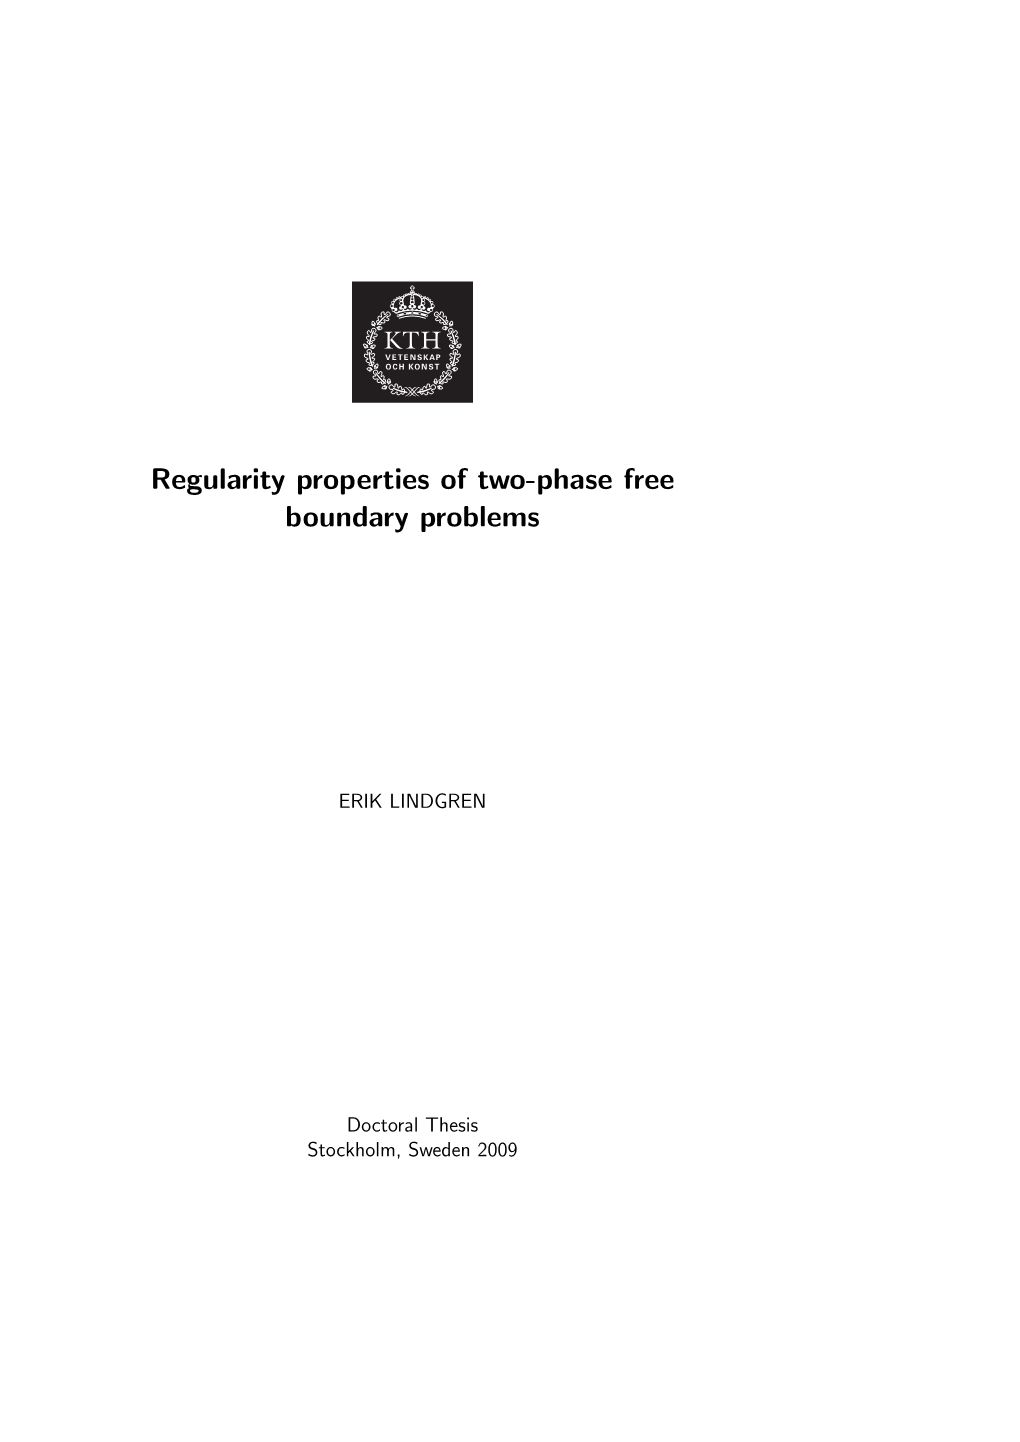 Regularity Properties of Two-Phase Free Boundary Problems